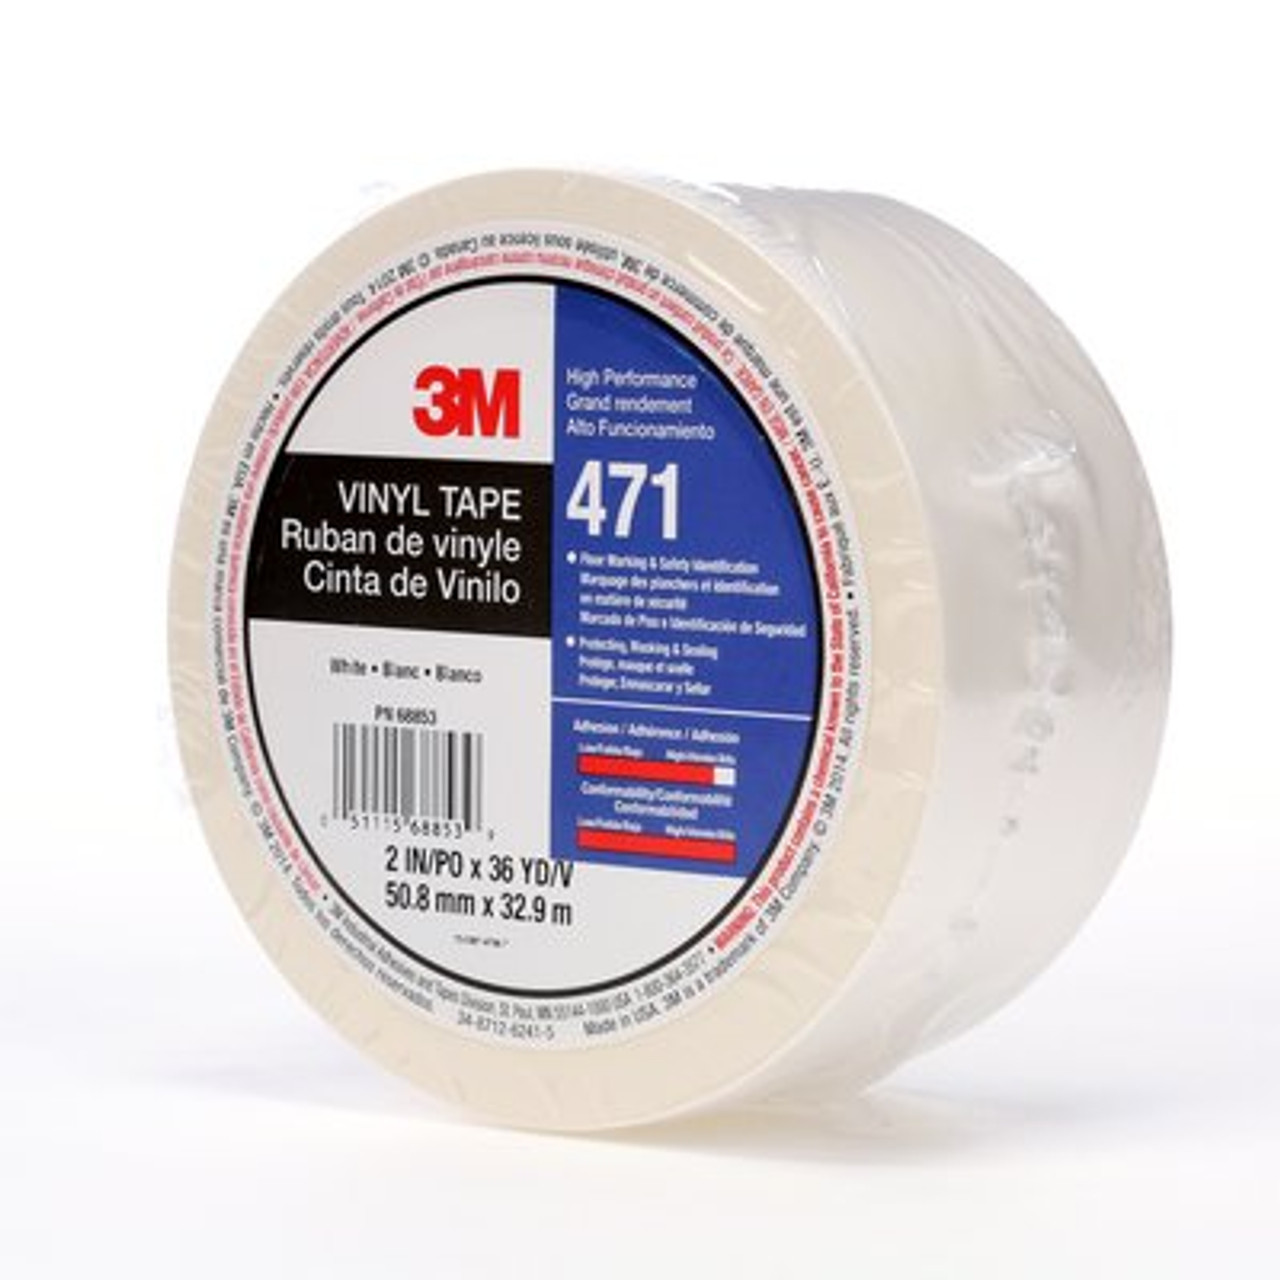 3M™ Vinyl Tape 471, White, 2 in x 36 yd, 5.2 mil Individually wrapped